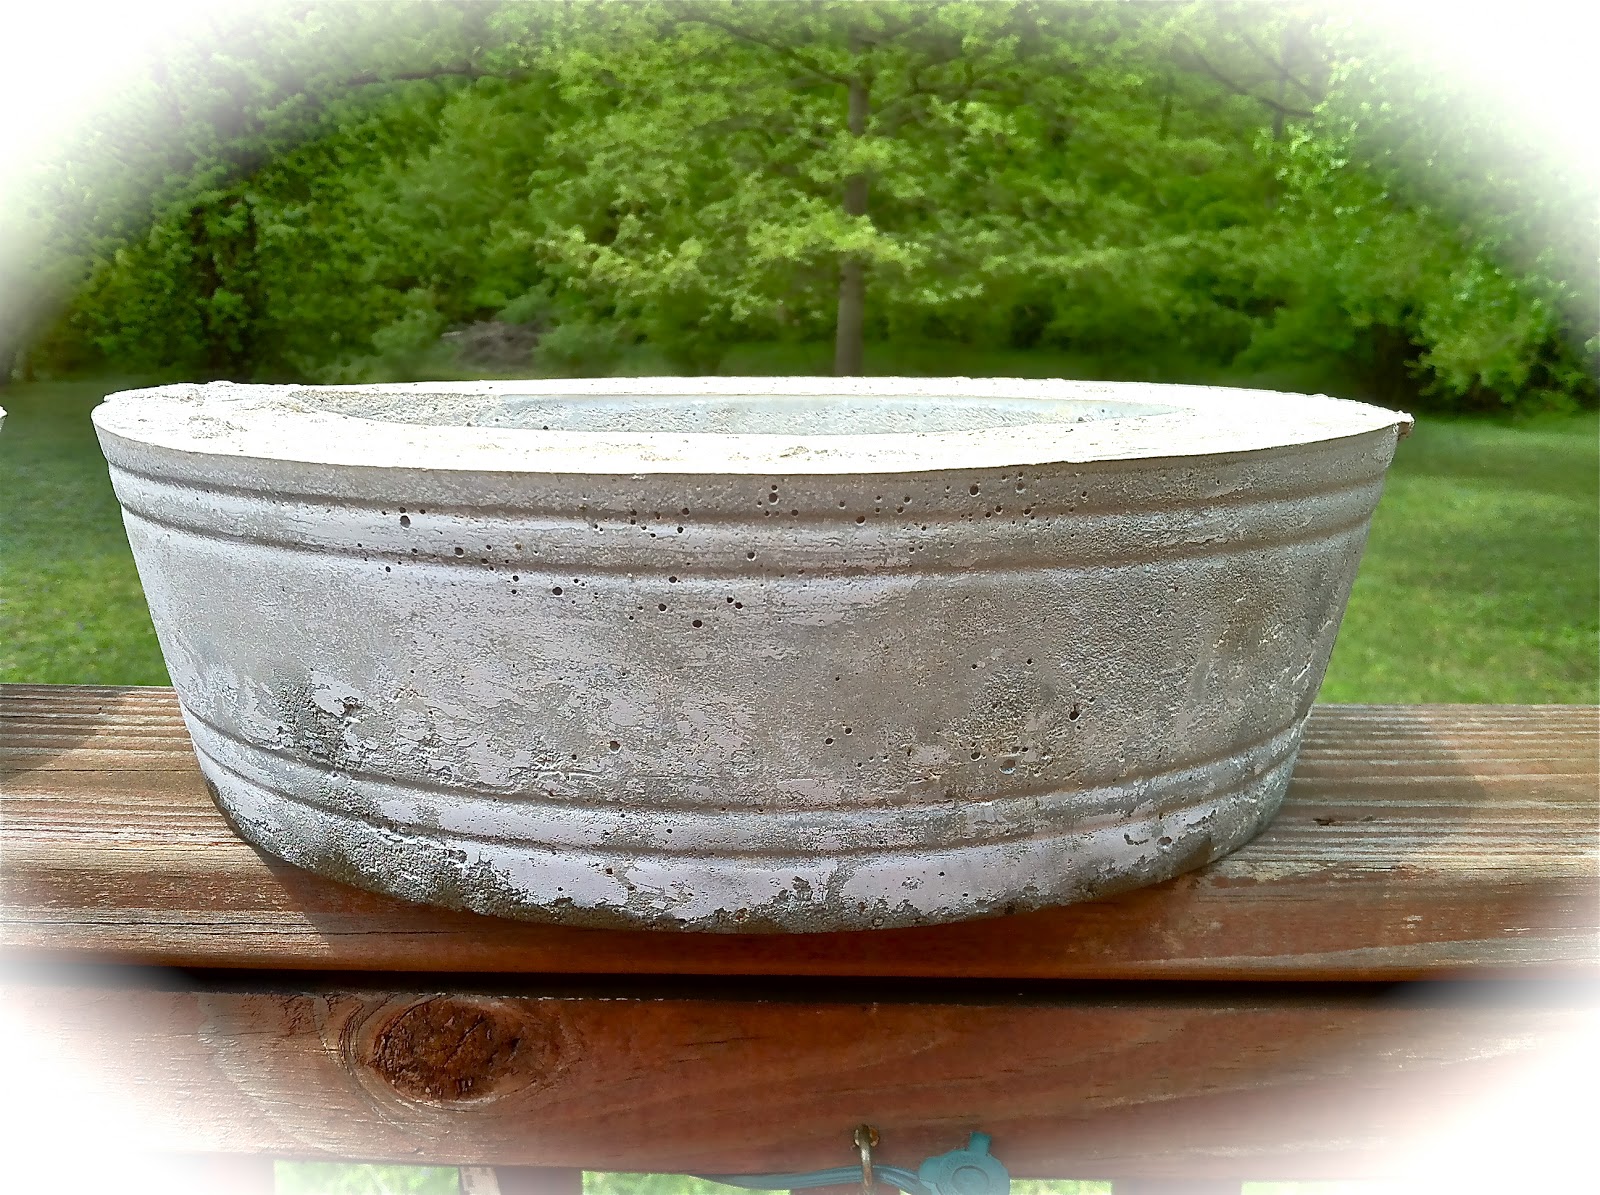 everyday donna: Make Your Own Concrete Planters - Cheap!